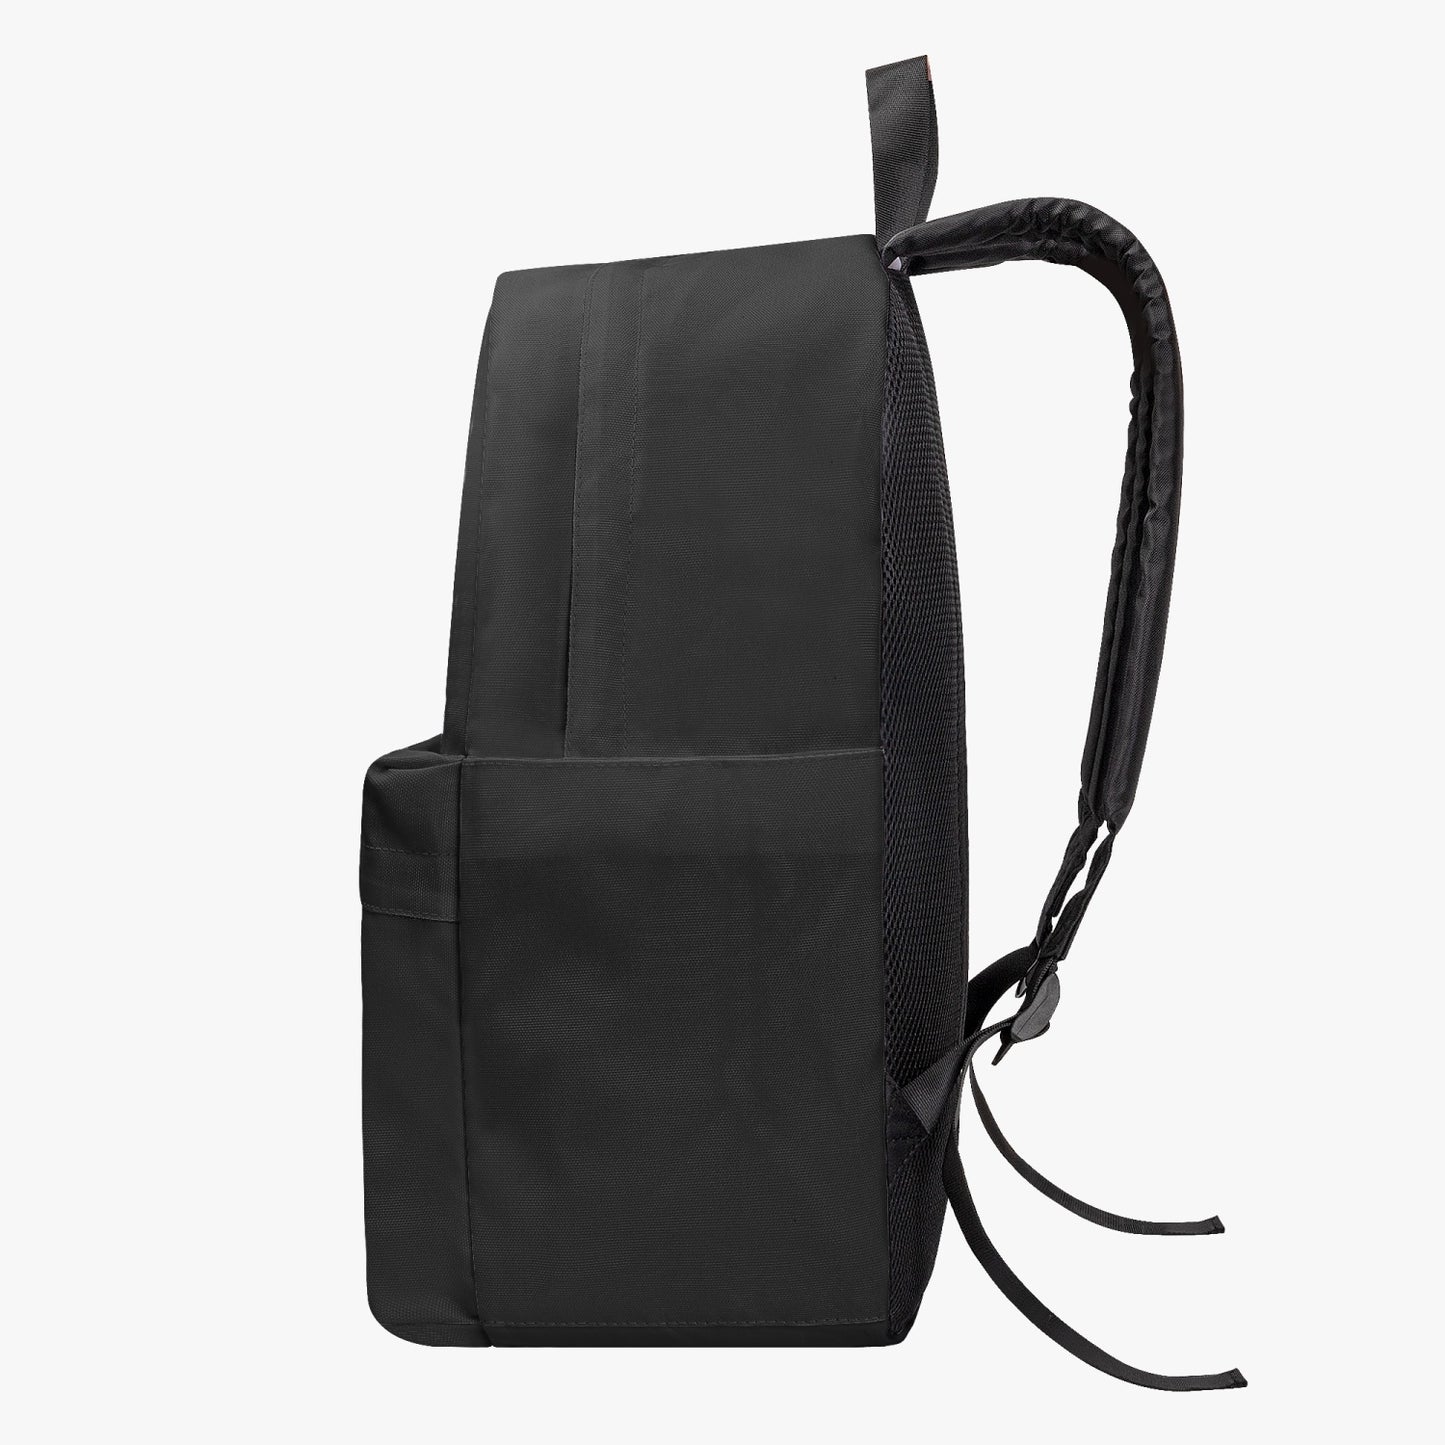 THE JUNGLIST CANVAS BACKPACK